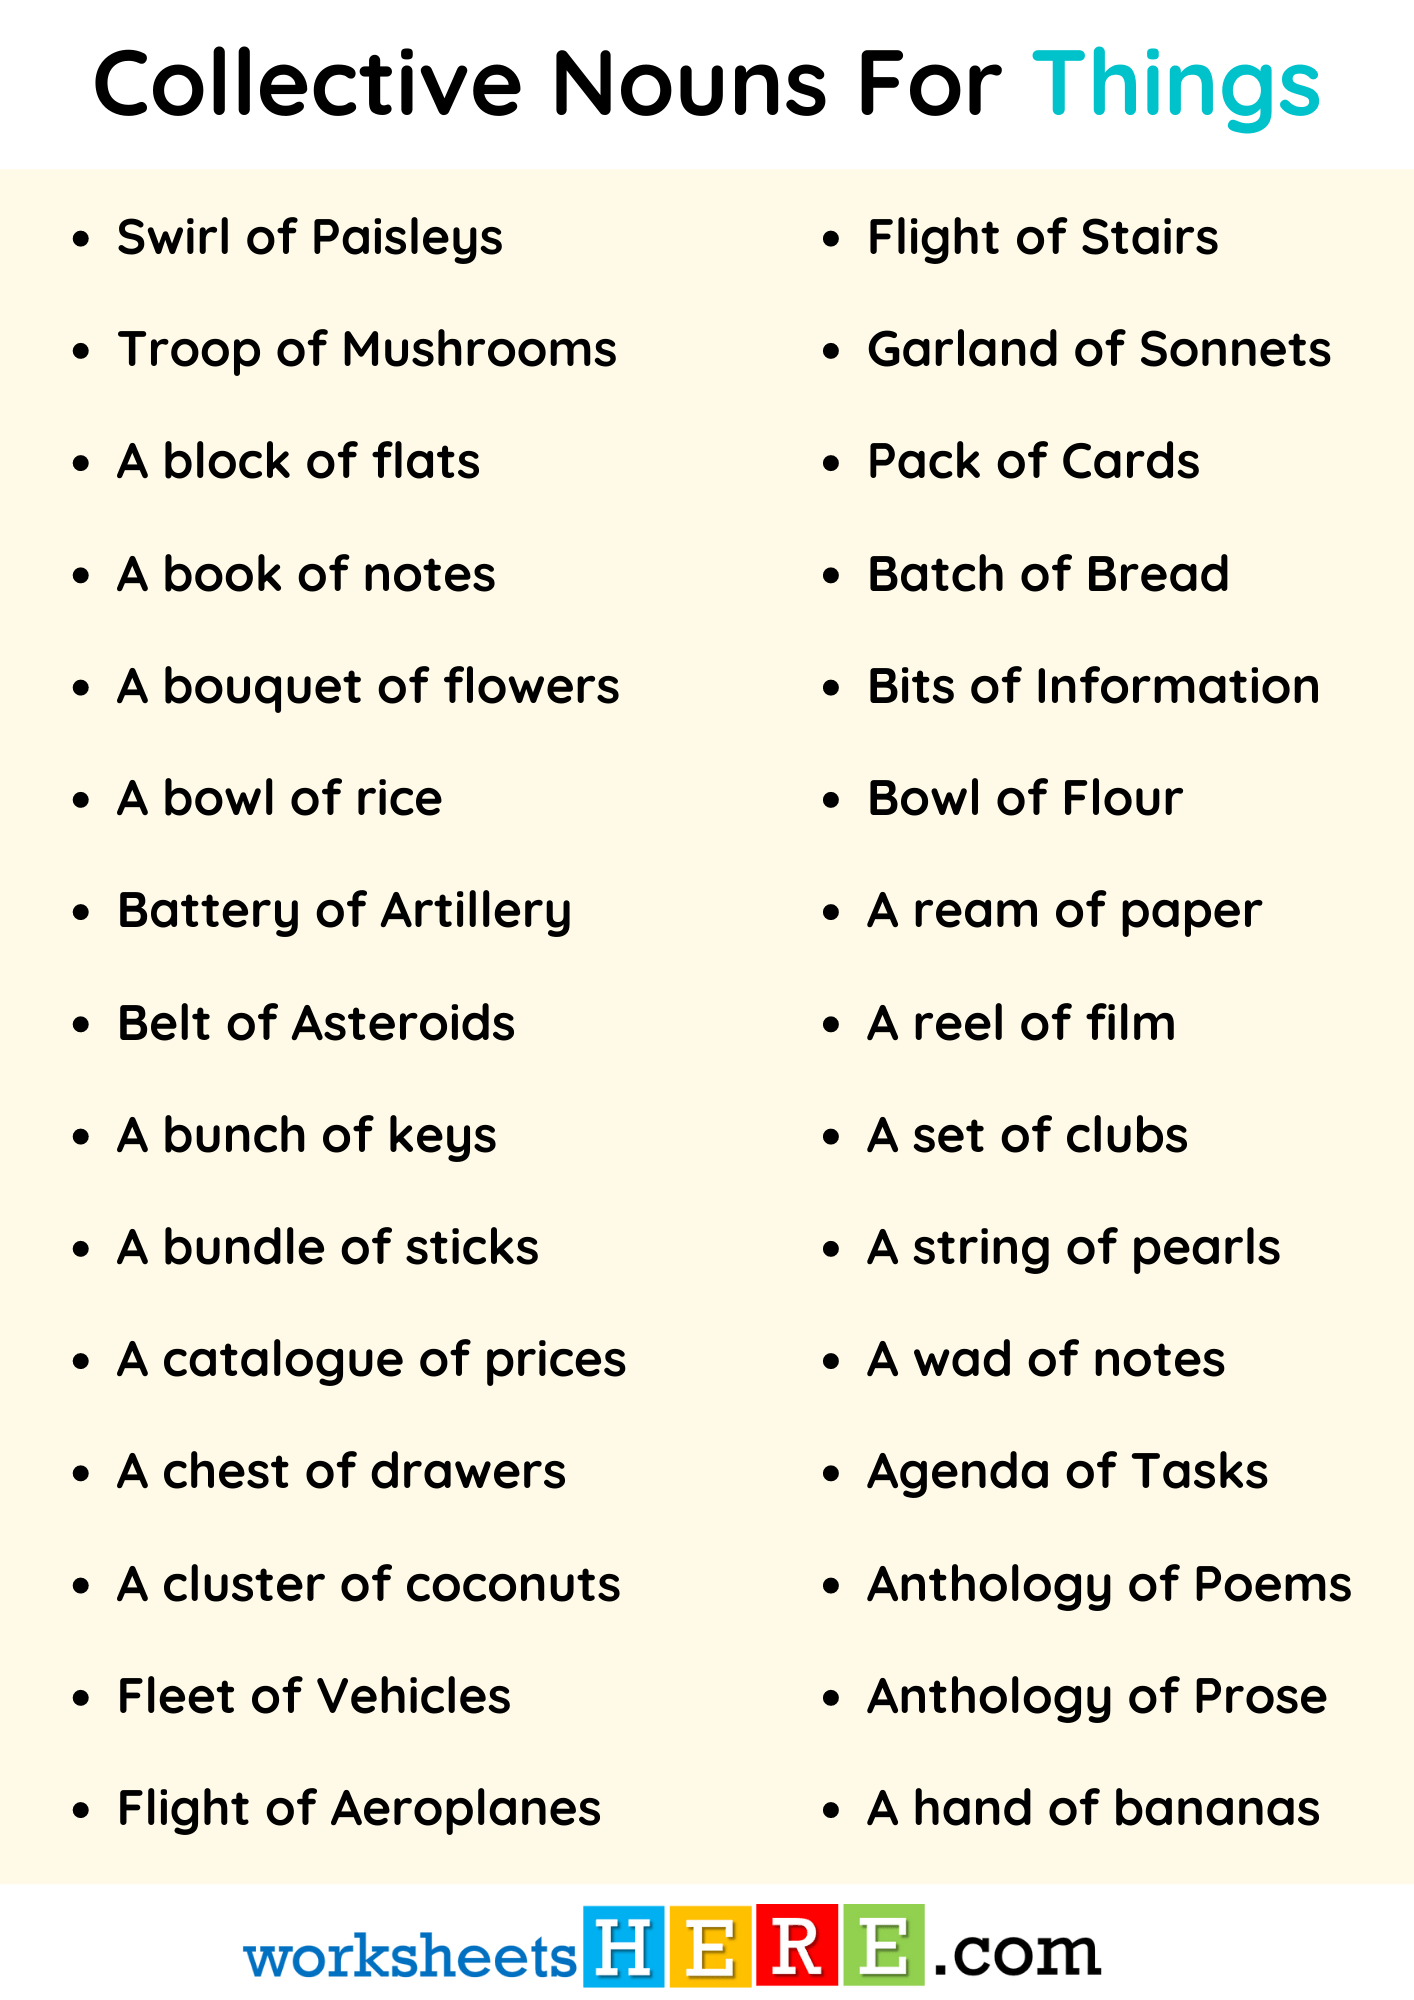 Collective Nouns For Things Vocabulary List For Kids and Students